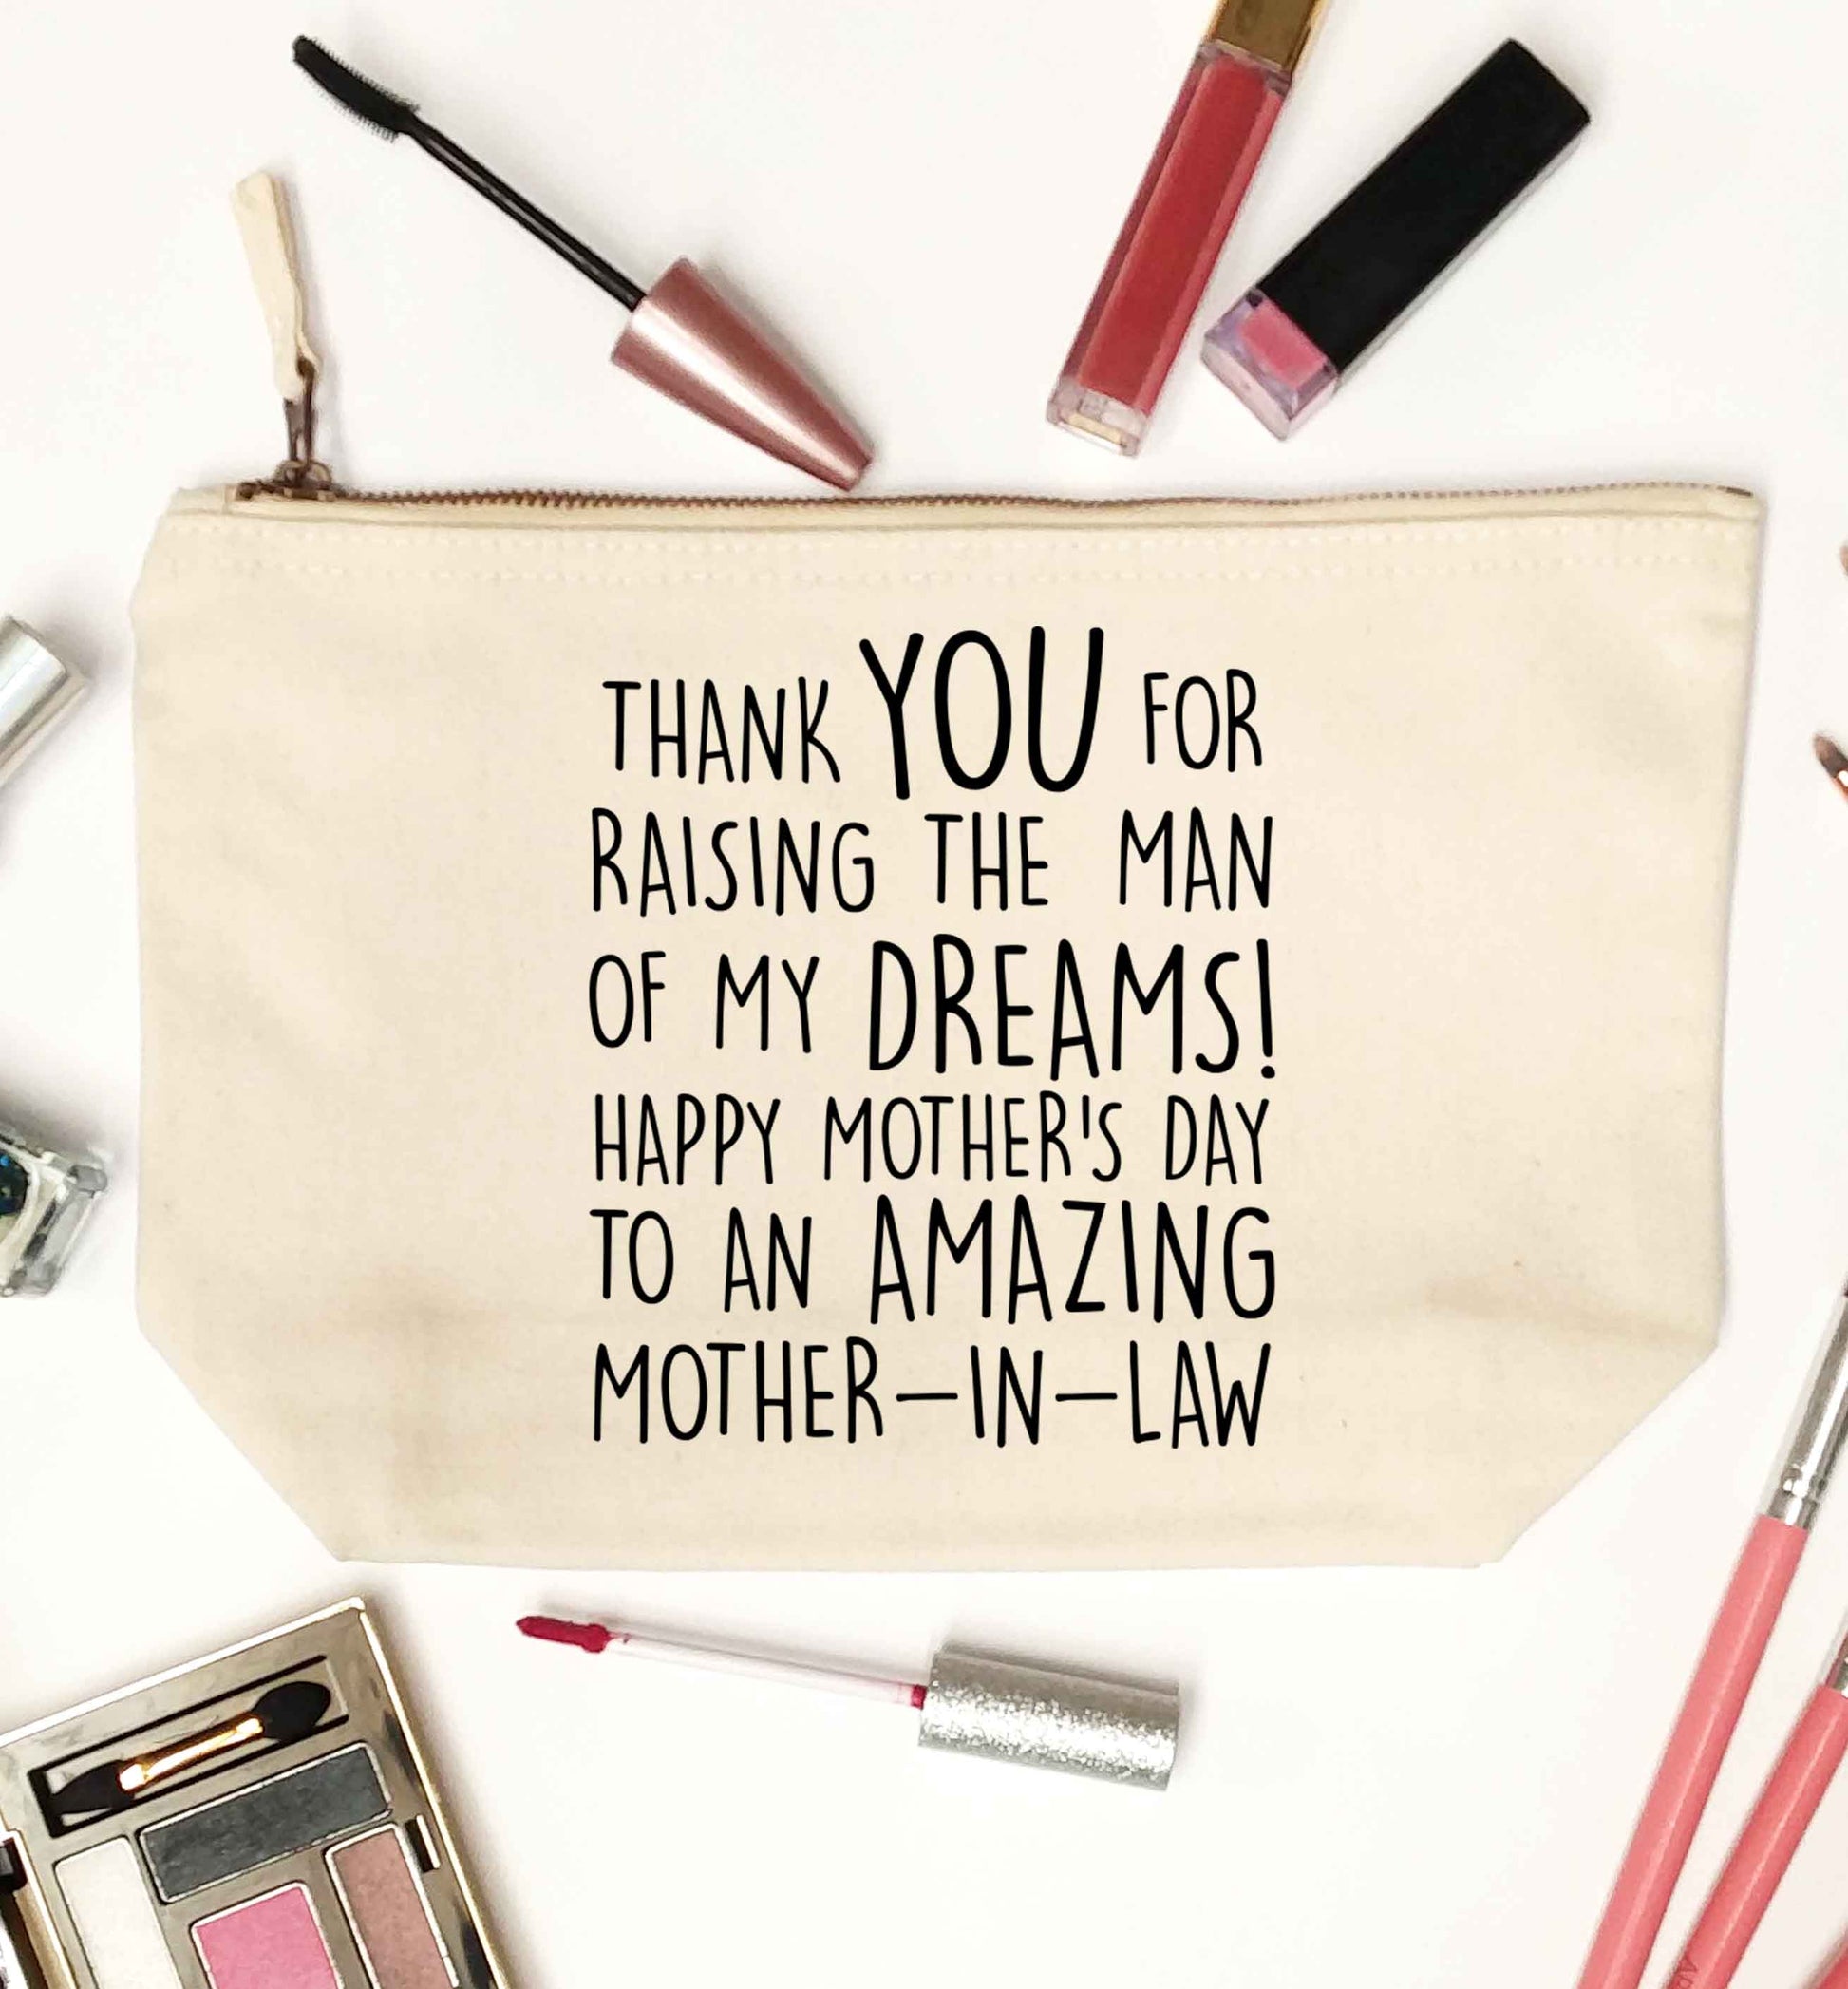 Raising the man of my dreams mother's day mother-in-law natural makeup bag